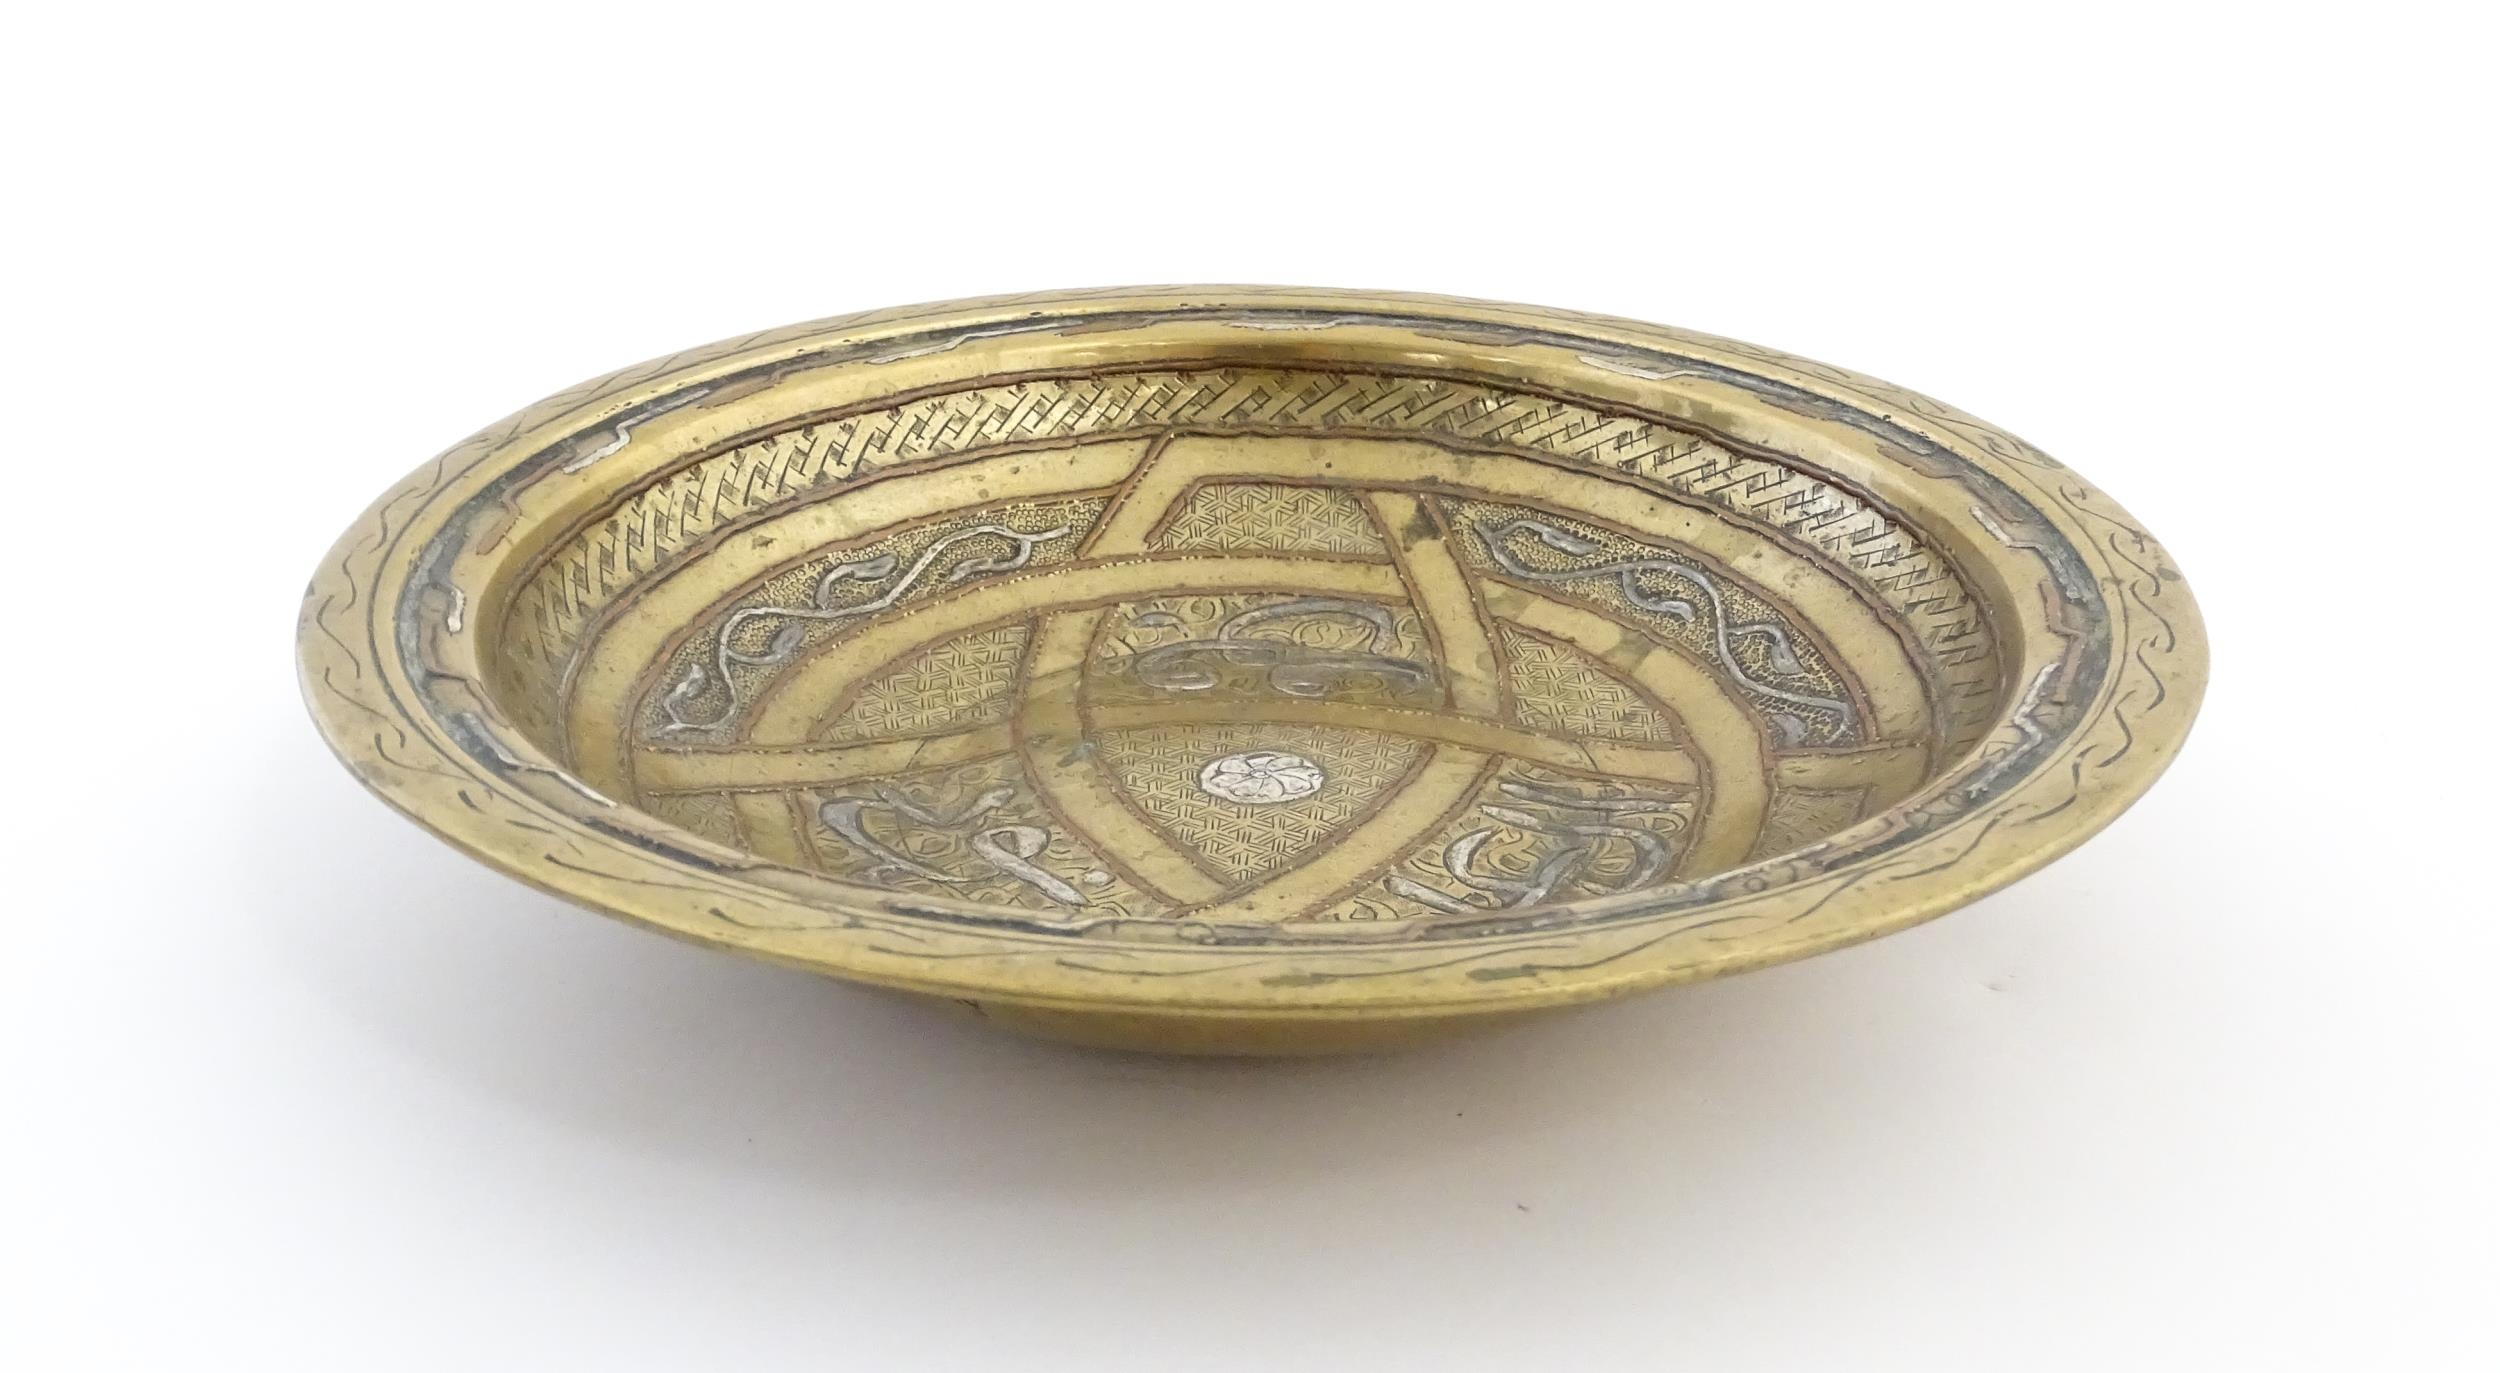 A Middle Eastern brass dish / bowl with incised detail and inlaid white metal and copper - Image 4 of 8